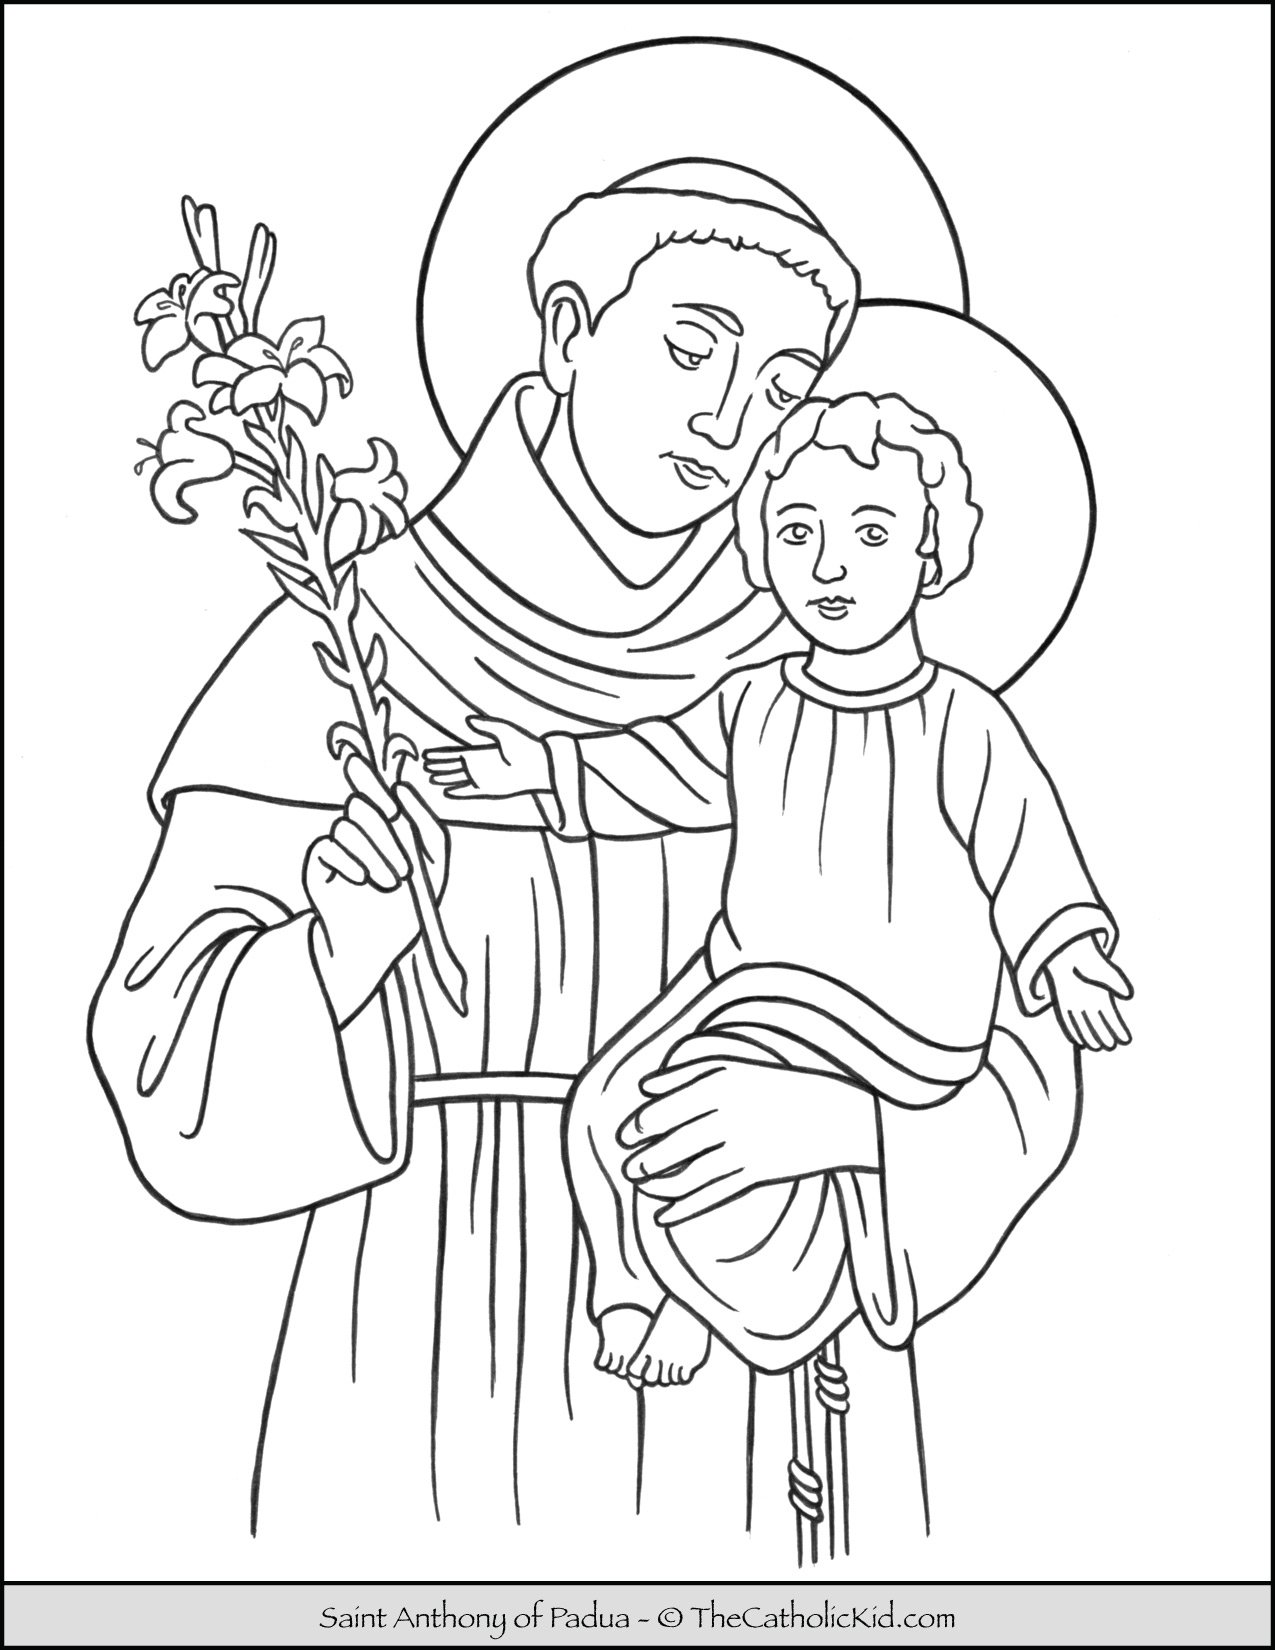 Saint anthony of padua coloring page